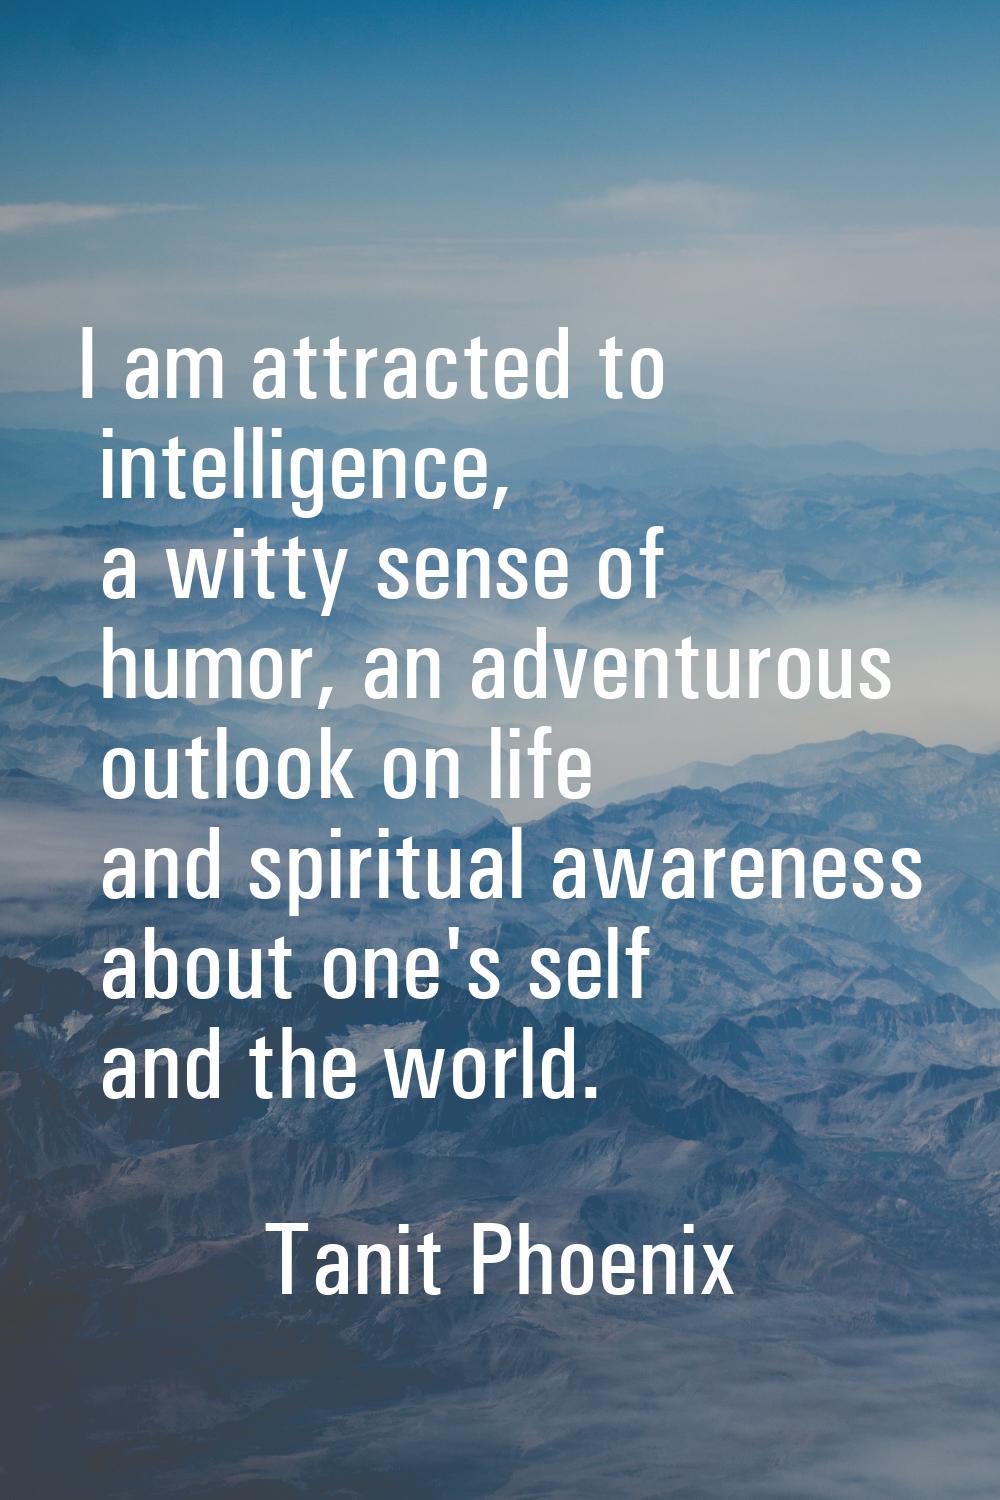 I am attracted to intelligence, a witty sense of humor, an adventurous outlook on life and spiritua